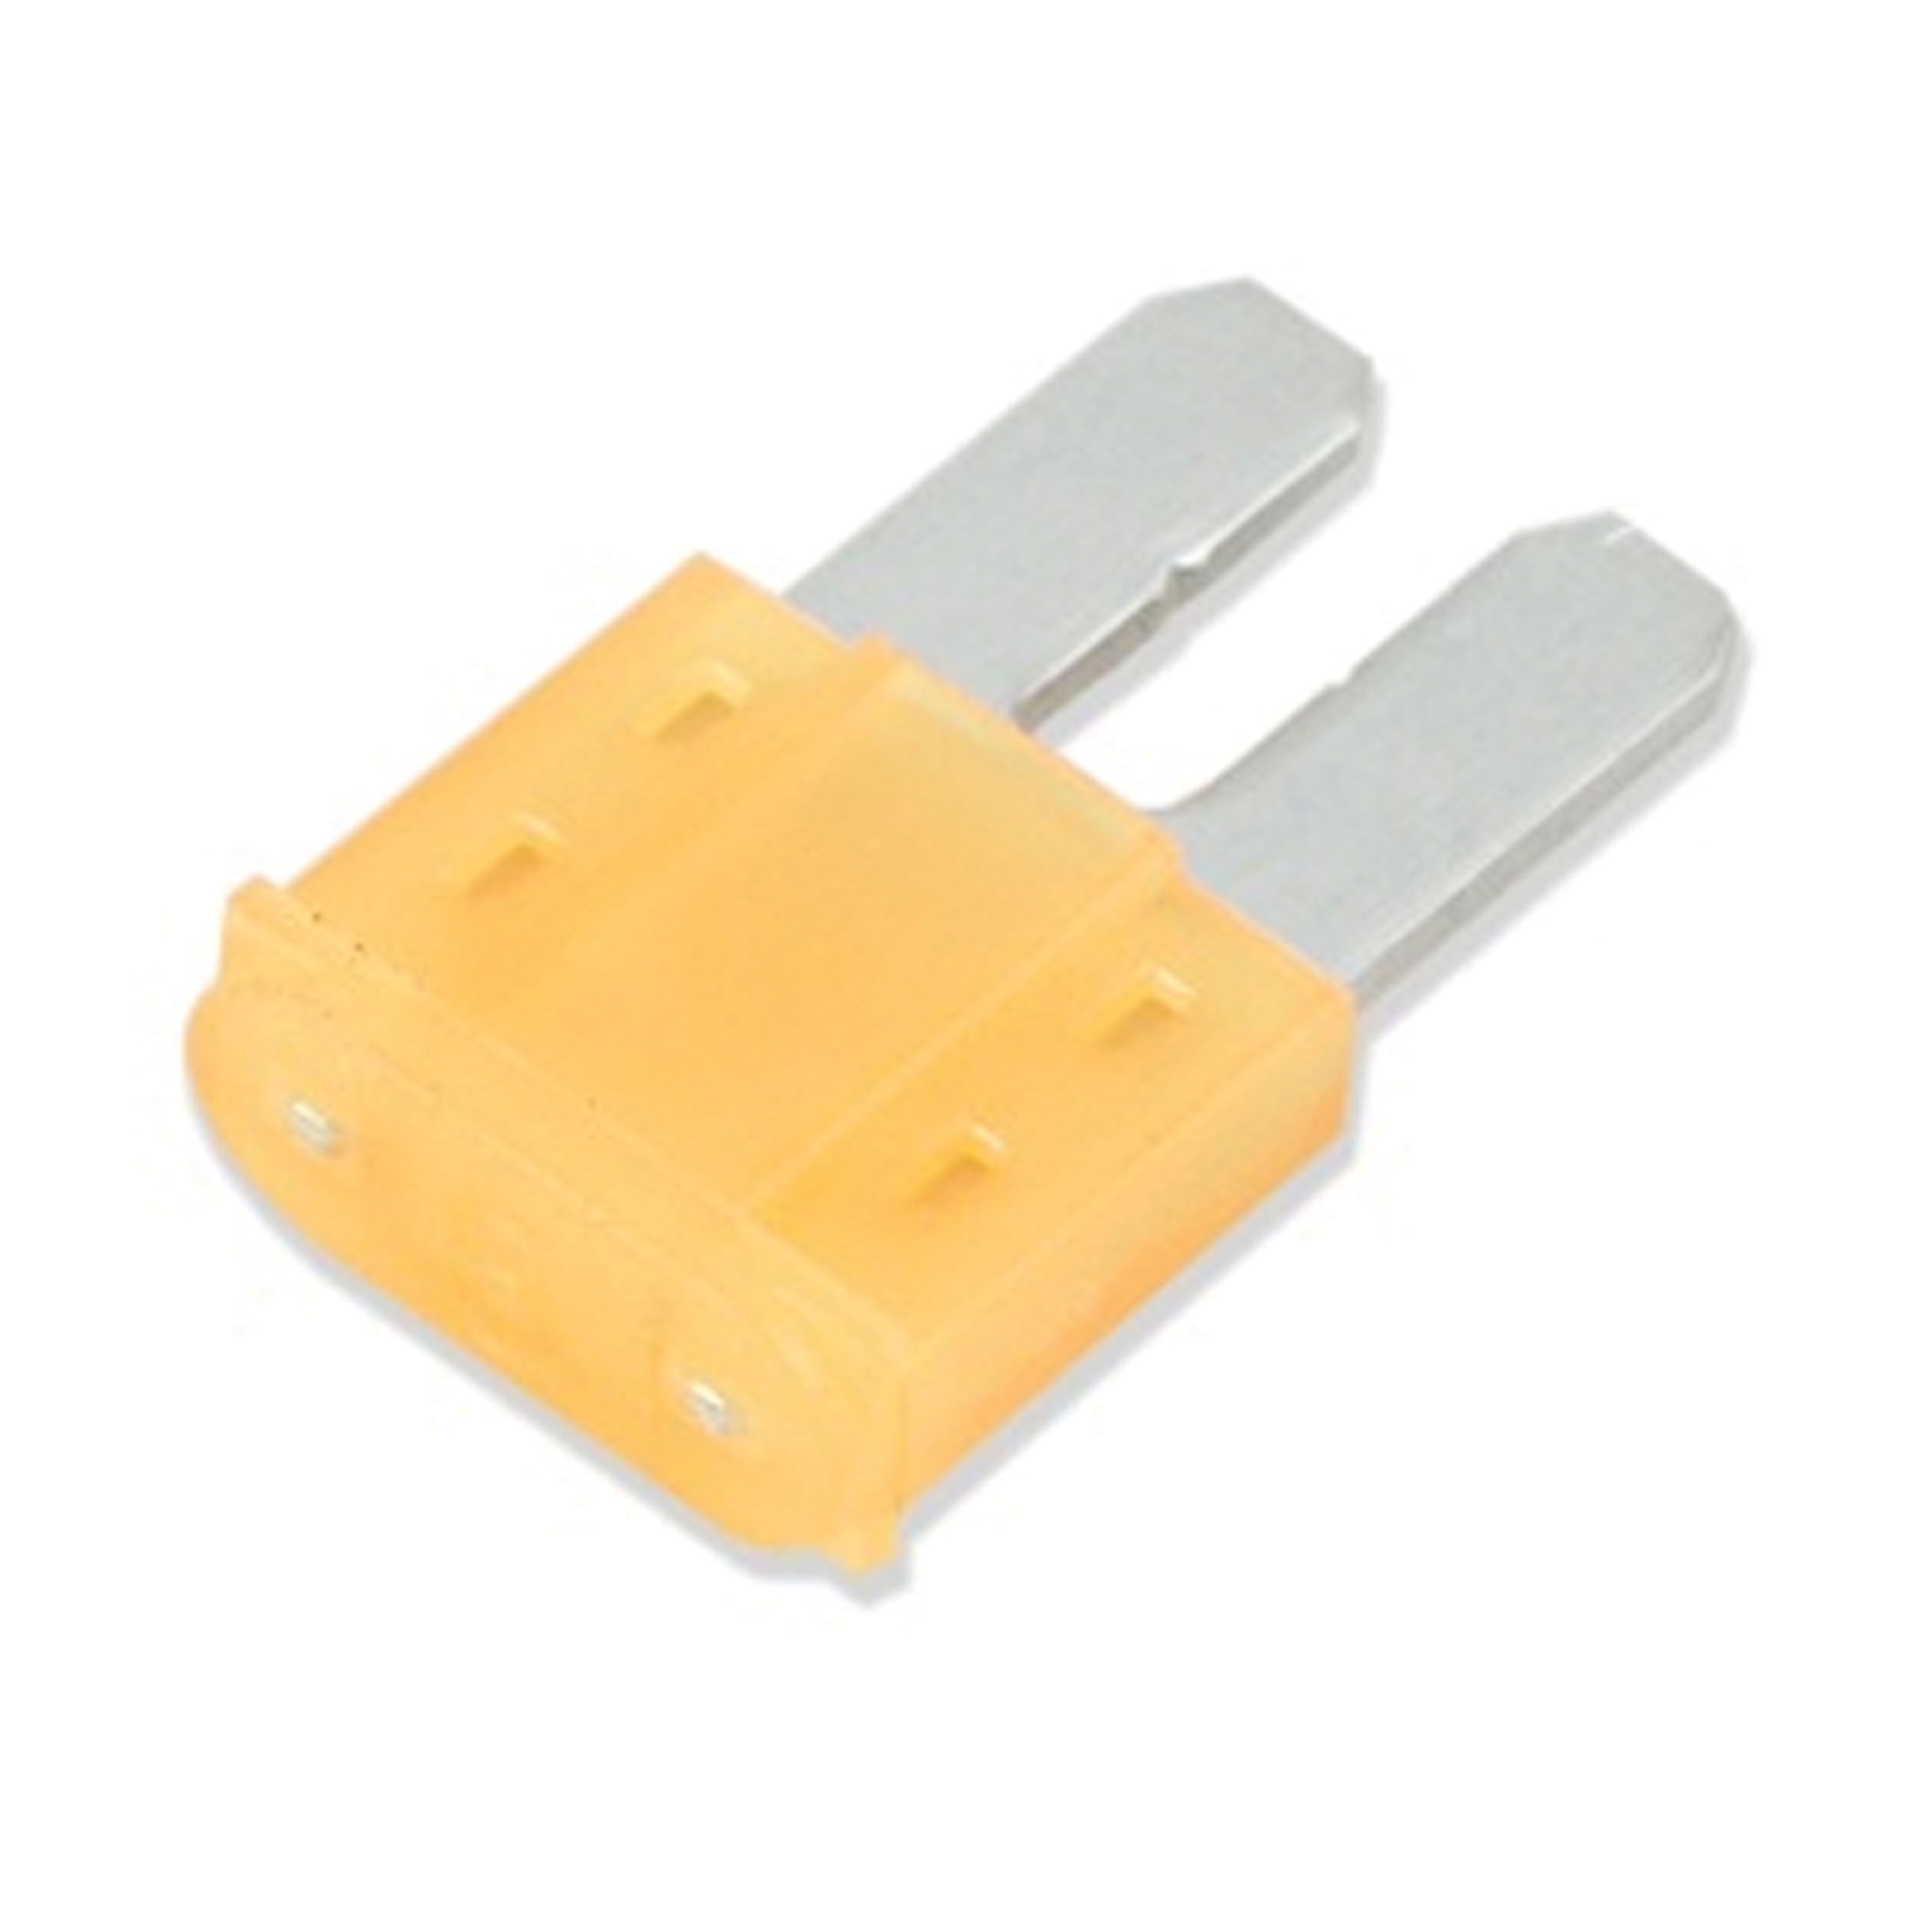 WirthCo 24820 MinBlade2 Fuse - 20 Amp (Yellow), 5-Pack